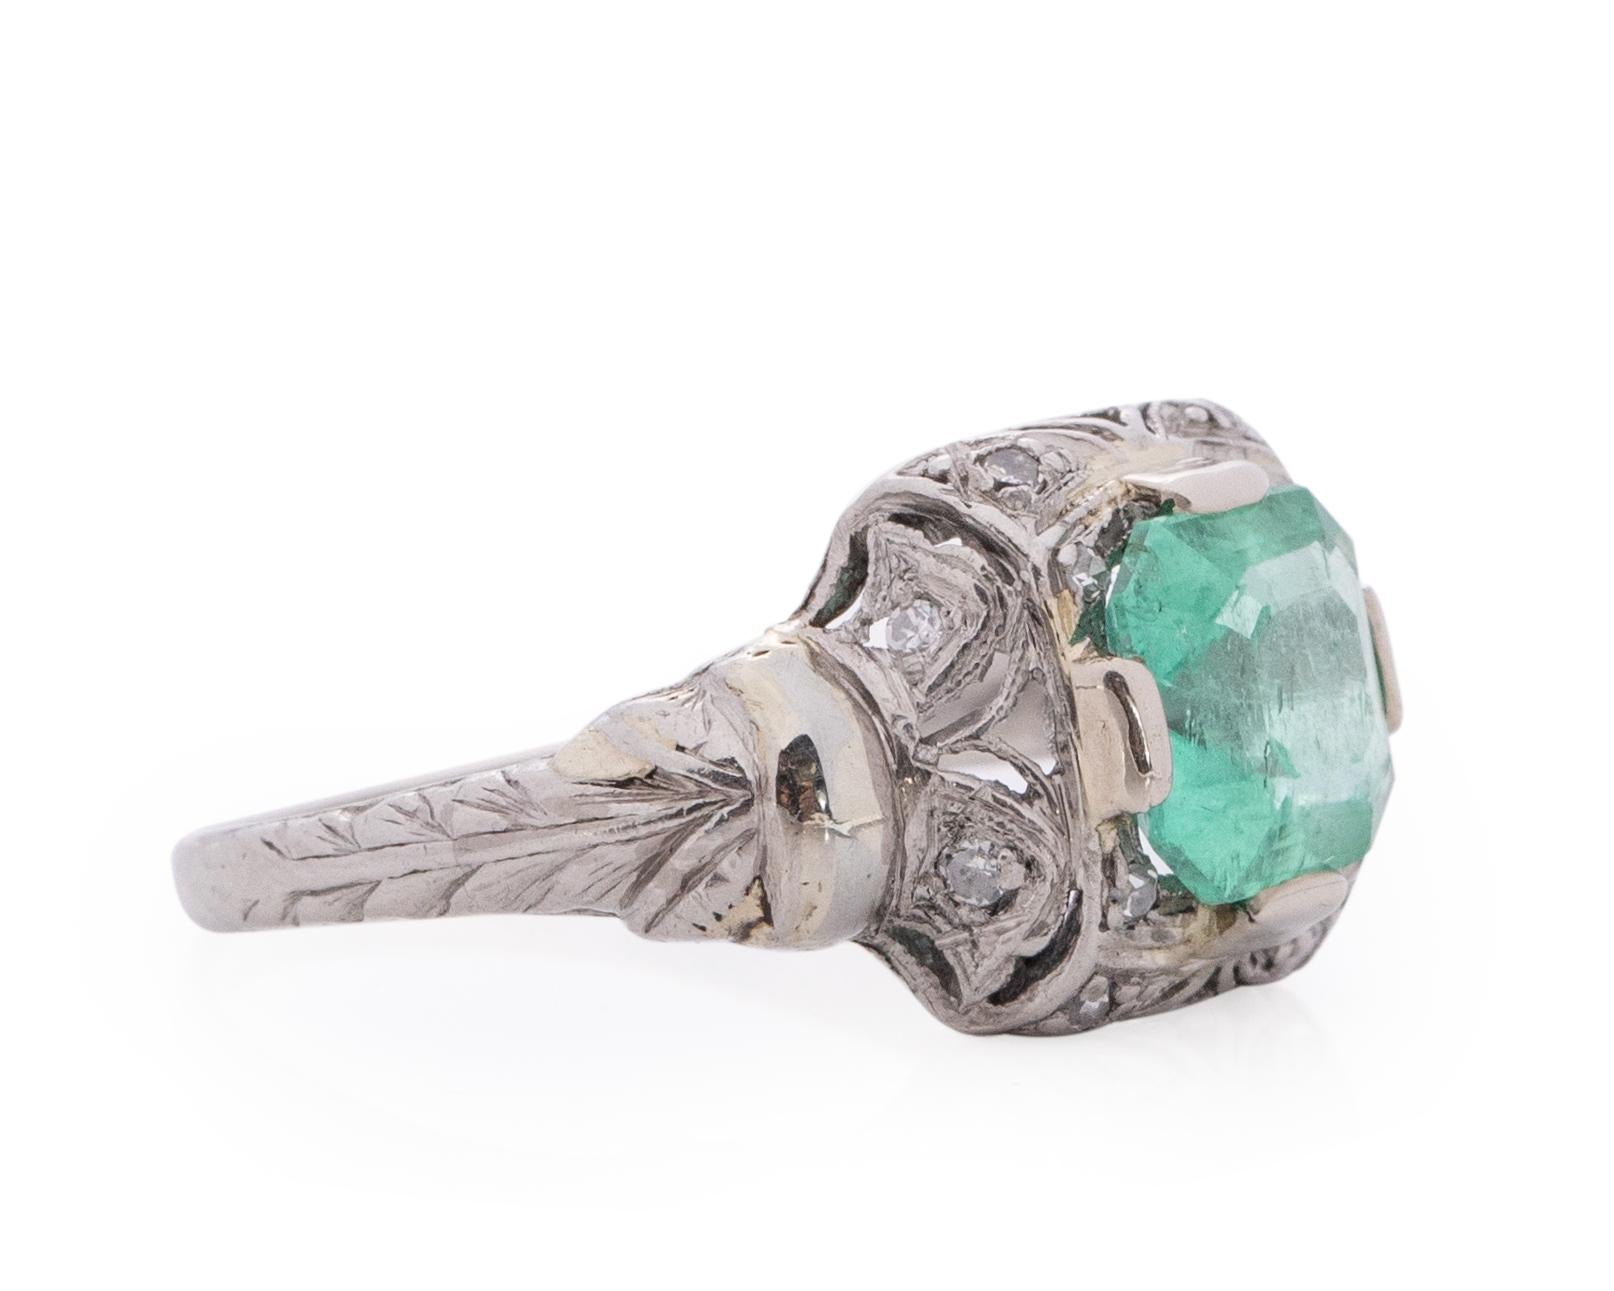 Item Details: 
Ring Size: 7.5
Metal Type: Platinum [Hallmarked, and Tested]
Weight: 3.5 grams

Center Stone Details:
Type: Emerald, Natural, Colombian
Weight: 1.35ct
Cut: Emerald Cut
Color: Green
Comments: Oiled

Side Stone Details:
Weight: